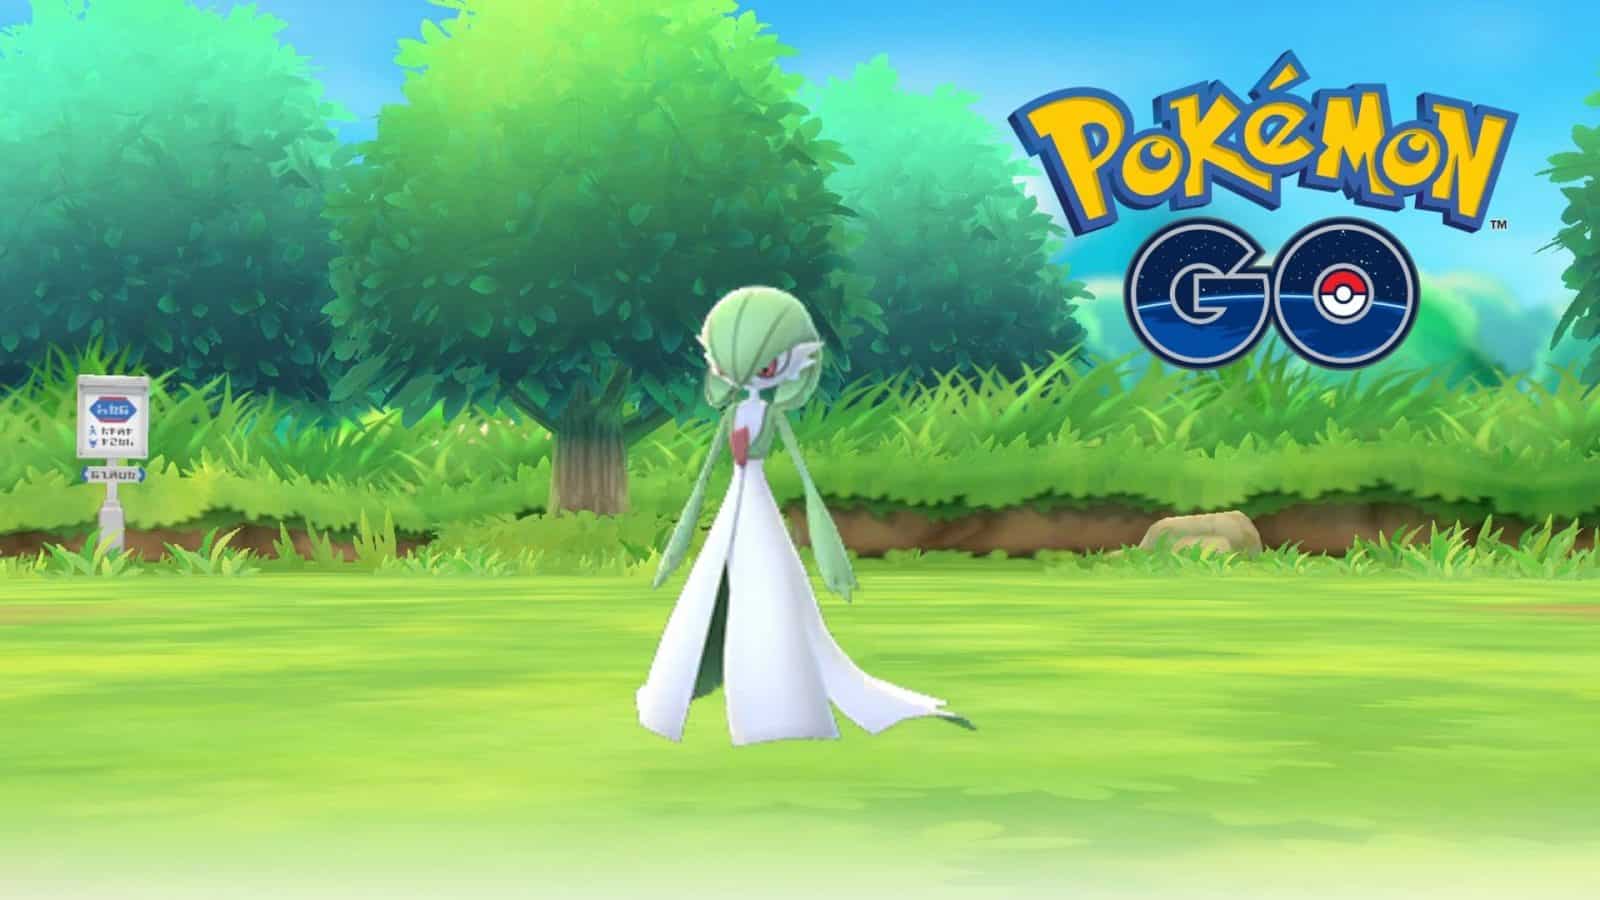 Pokémon Go leader counters for Sierra, Arlo, and Cliff in December